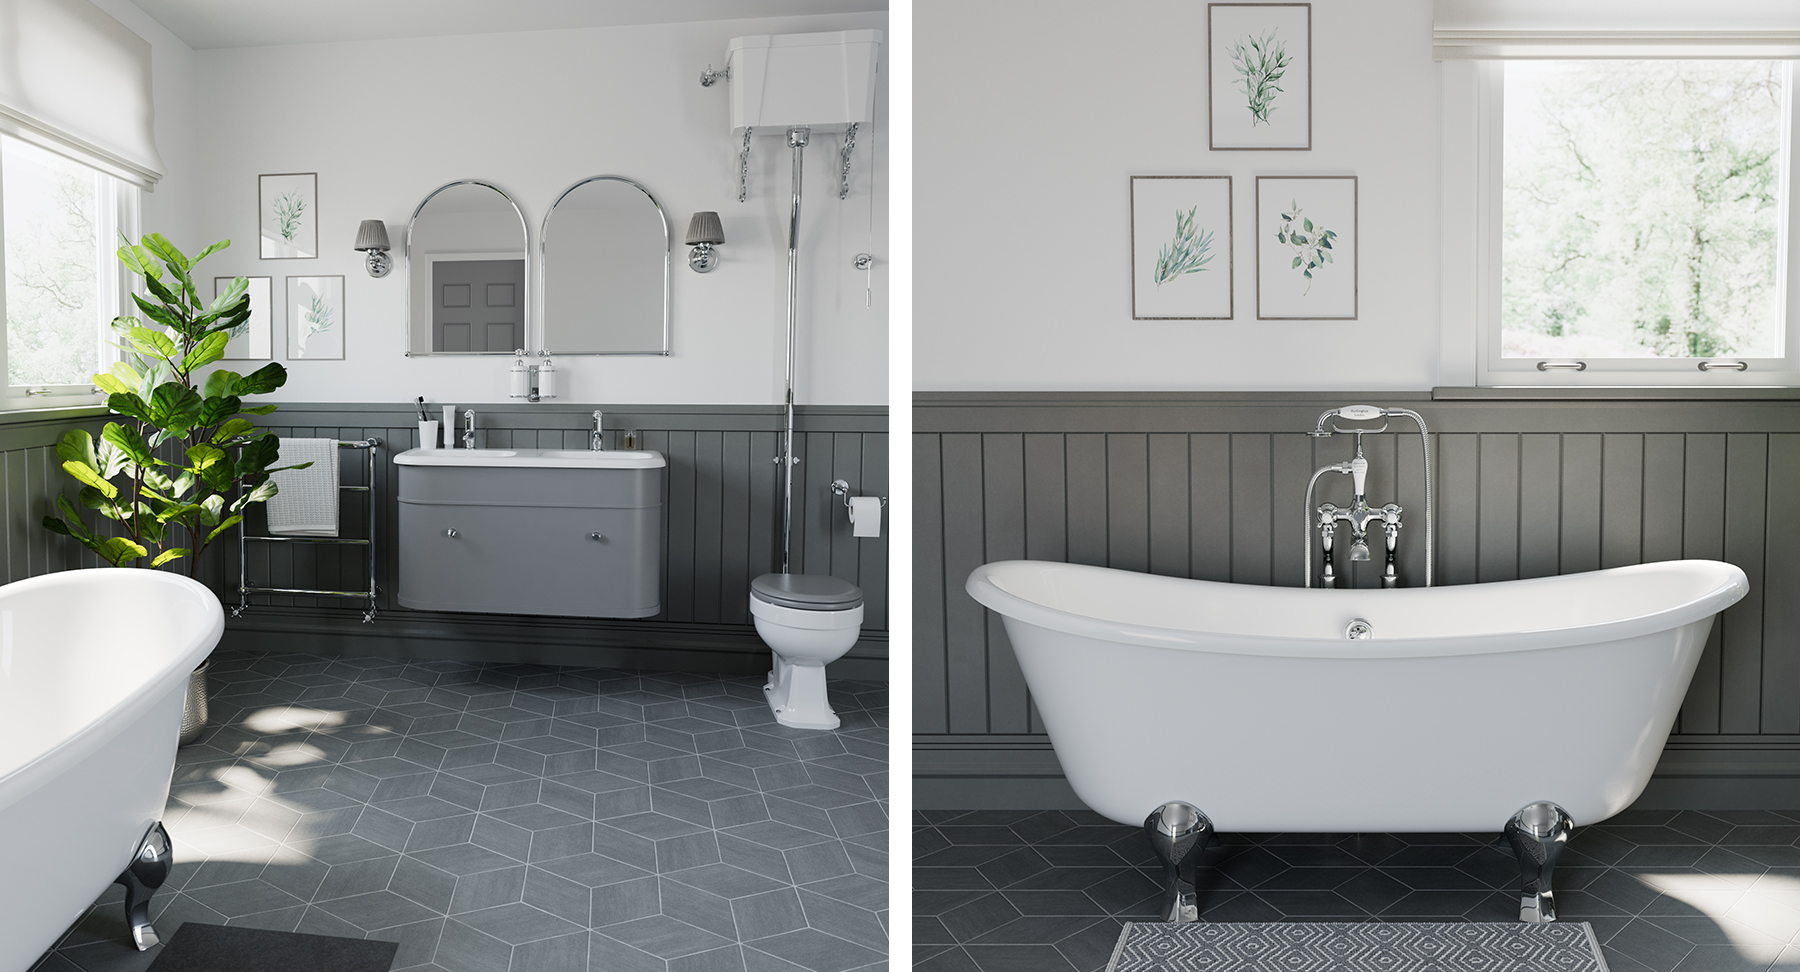 Traditional Bathroom Design | Bring Chalfont to your space for a classic style bathroom with a modern twist